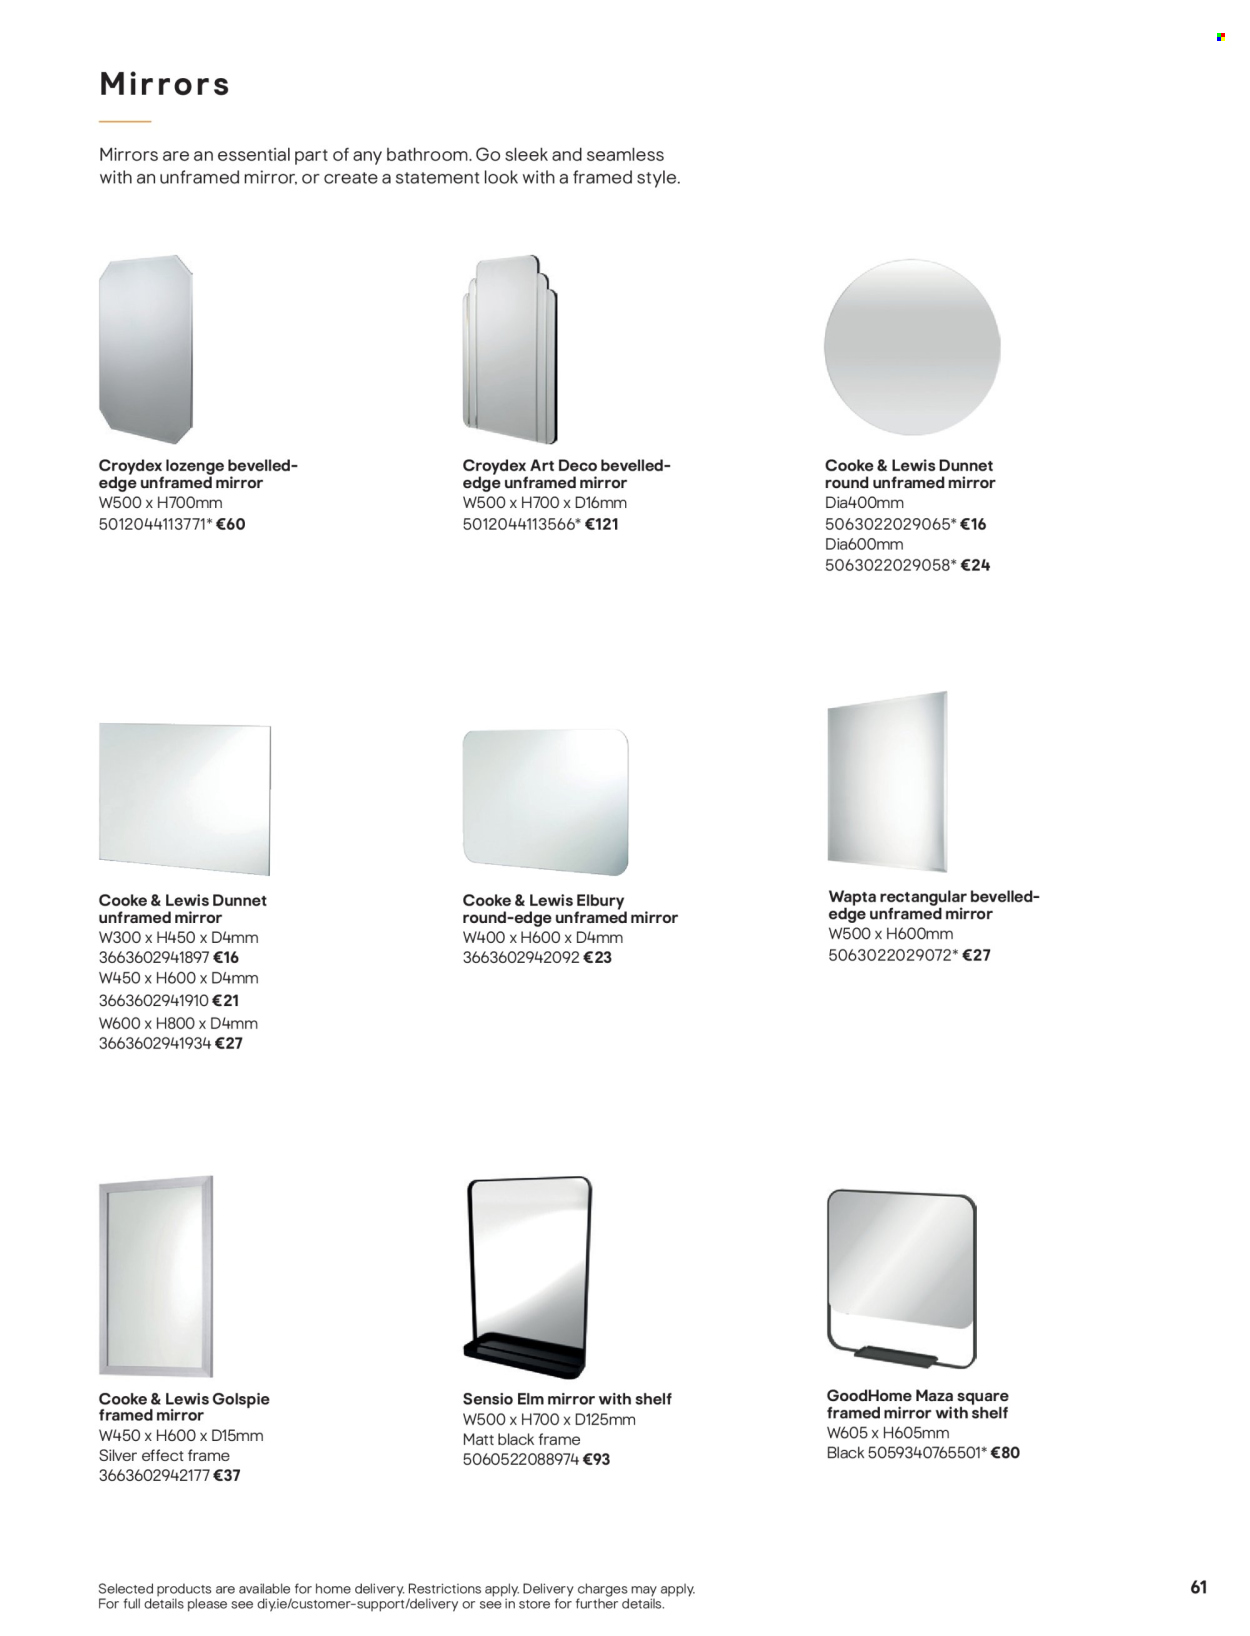 thumbnail - B&Q offer  - Sales products - mirror, mirror with shelf. Page 61.